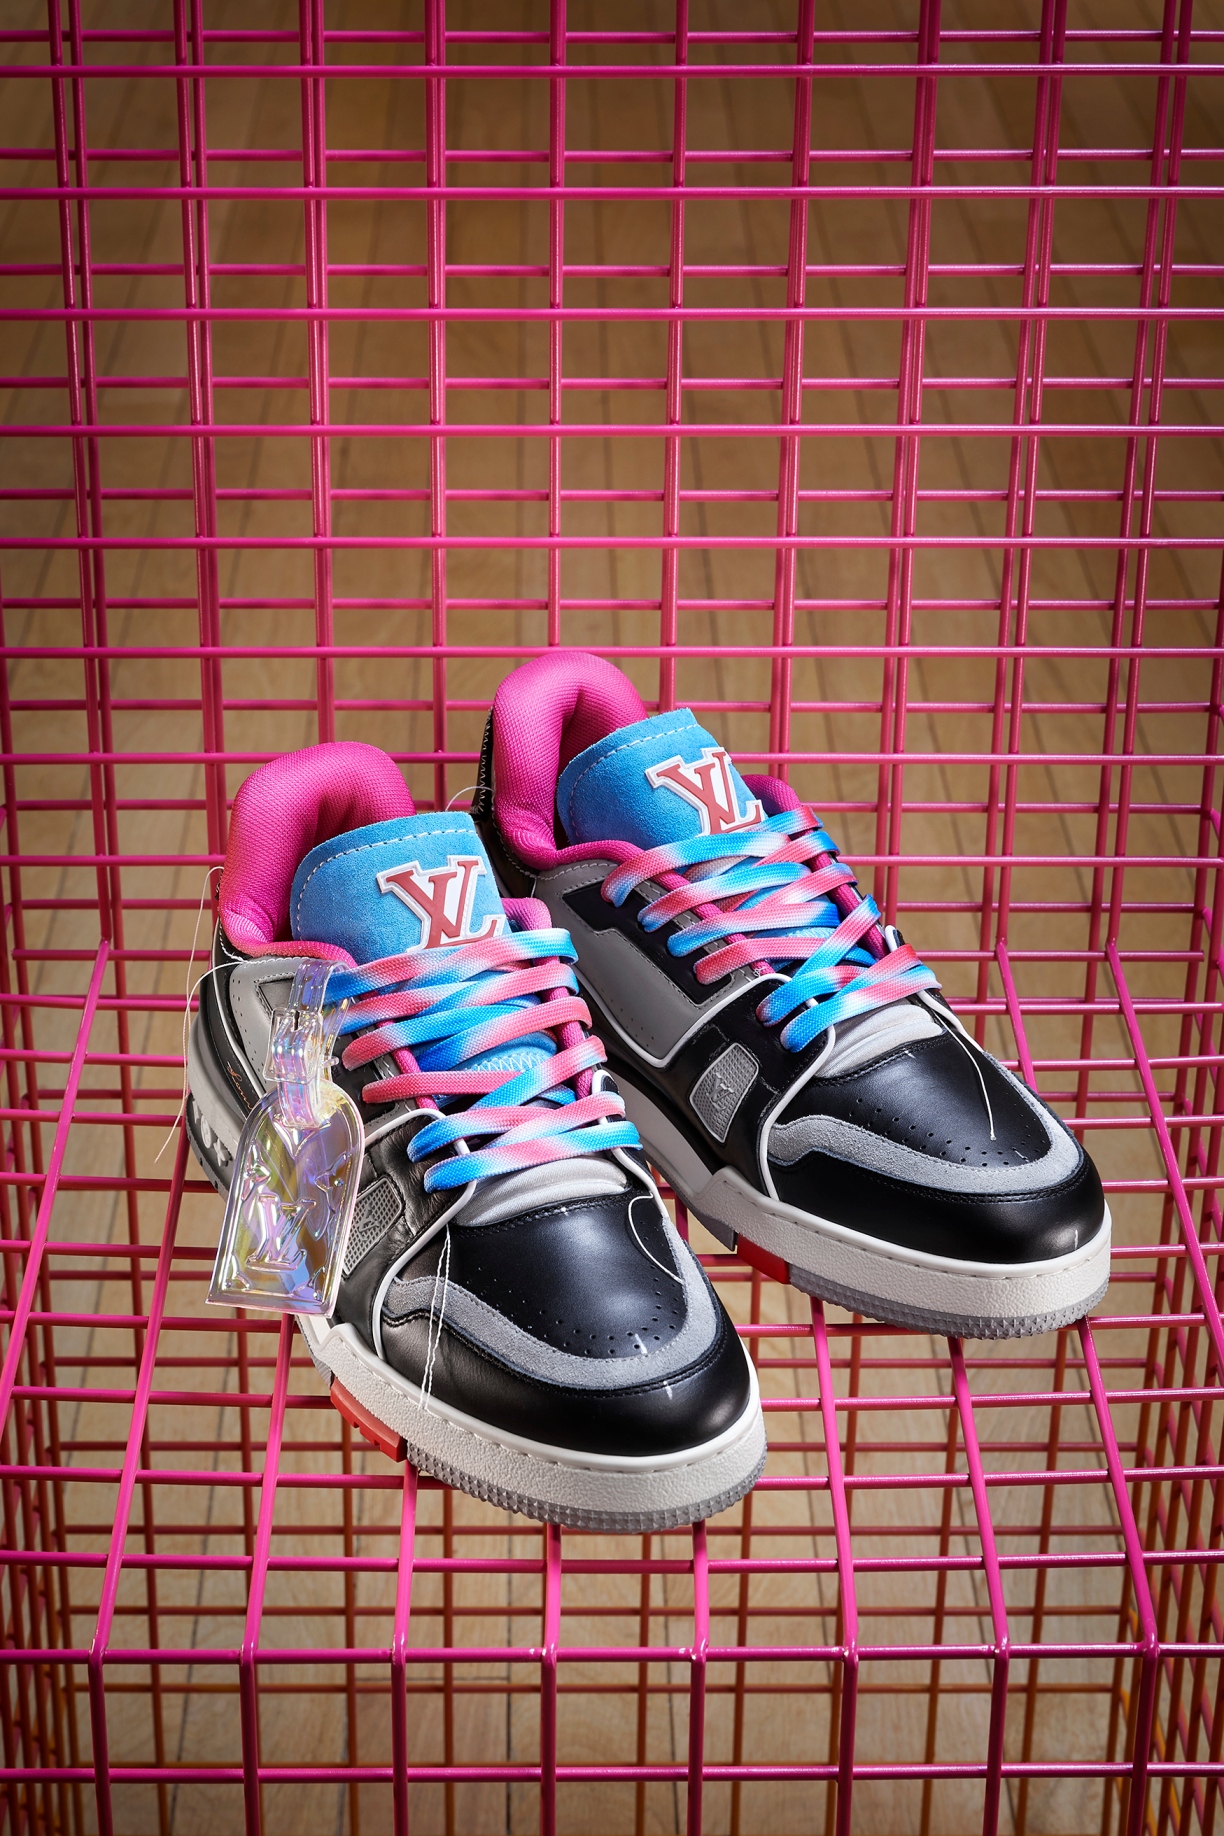 Louis Vuitton, Shoes, Not My Style But Definitely Very Cool Sneakers